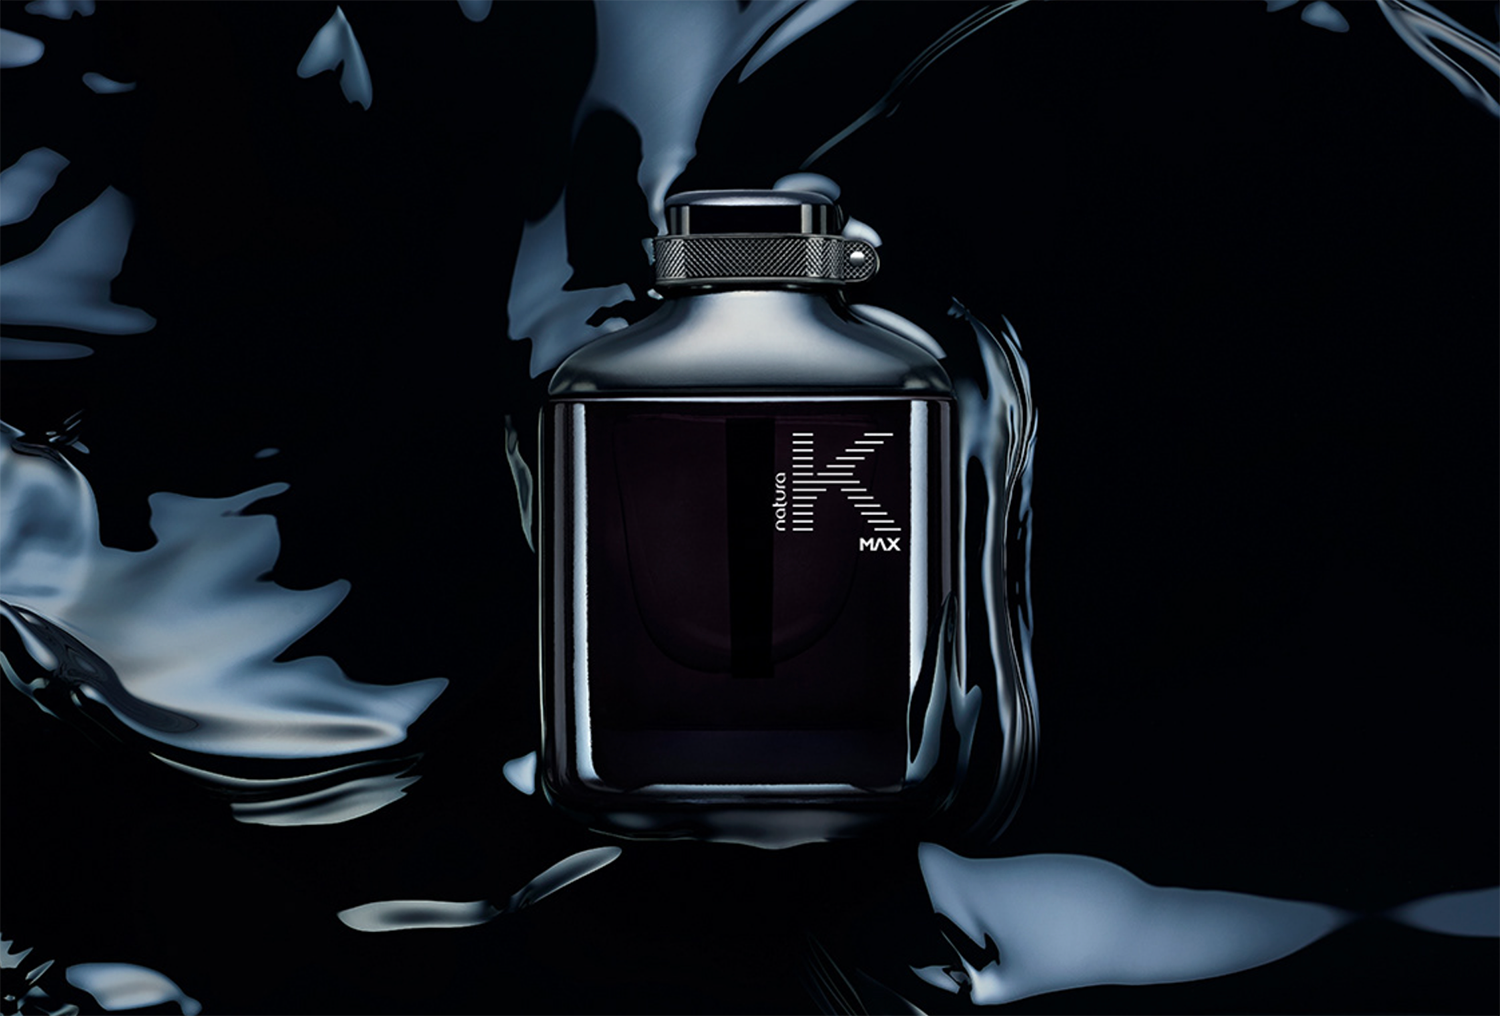 Perfume Bottle Design, at your Service! on Behance